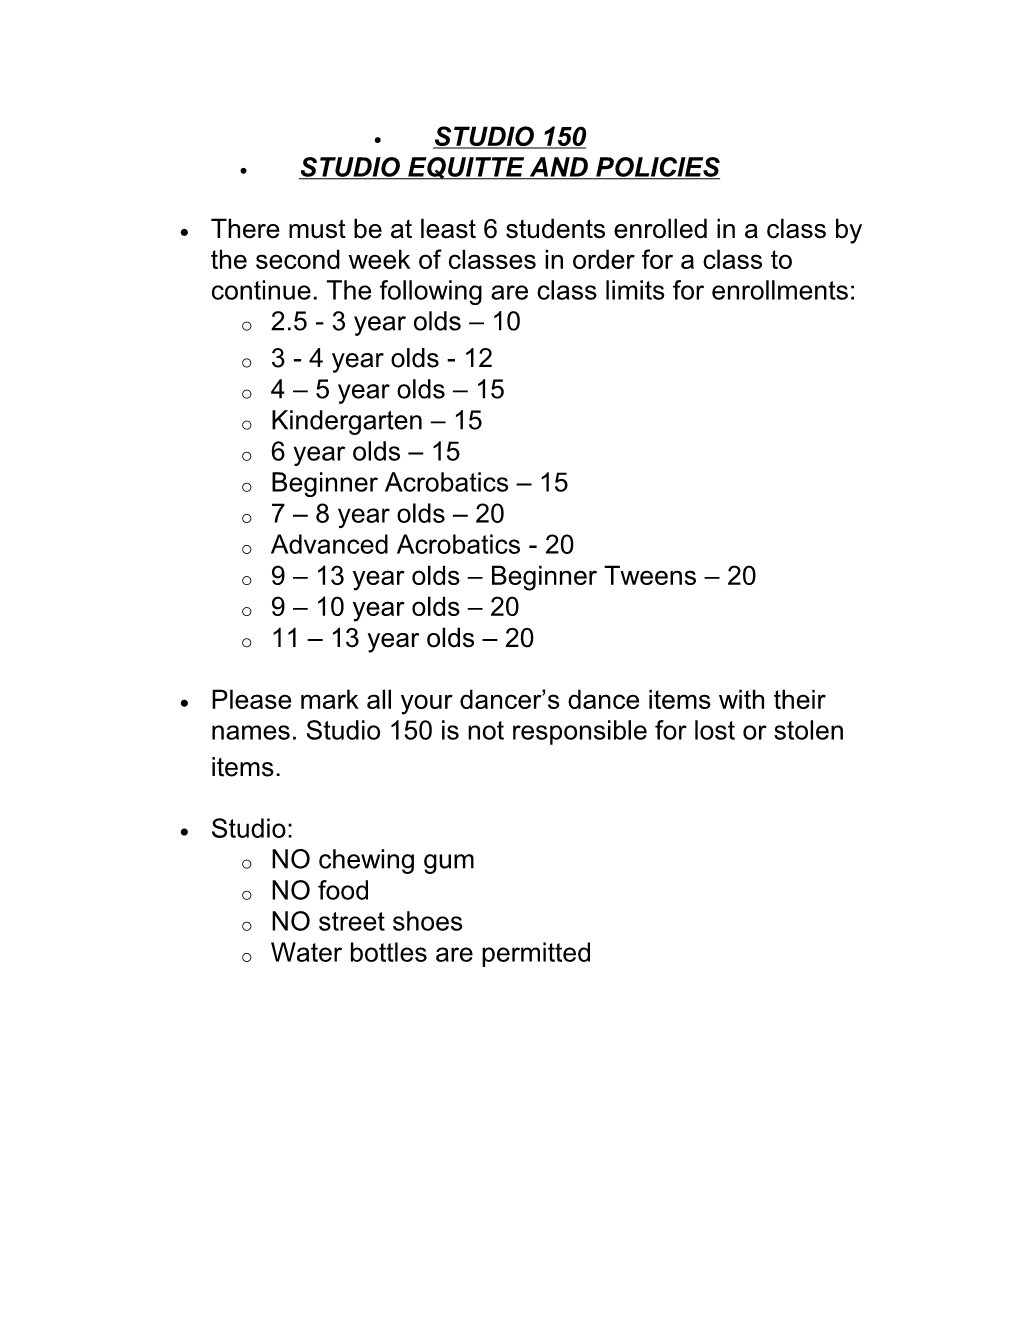 Studio Equitte and Policies